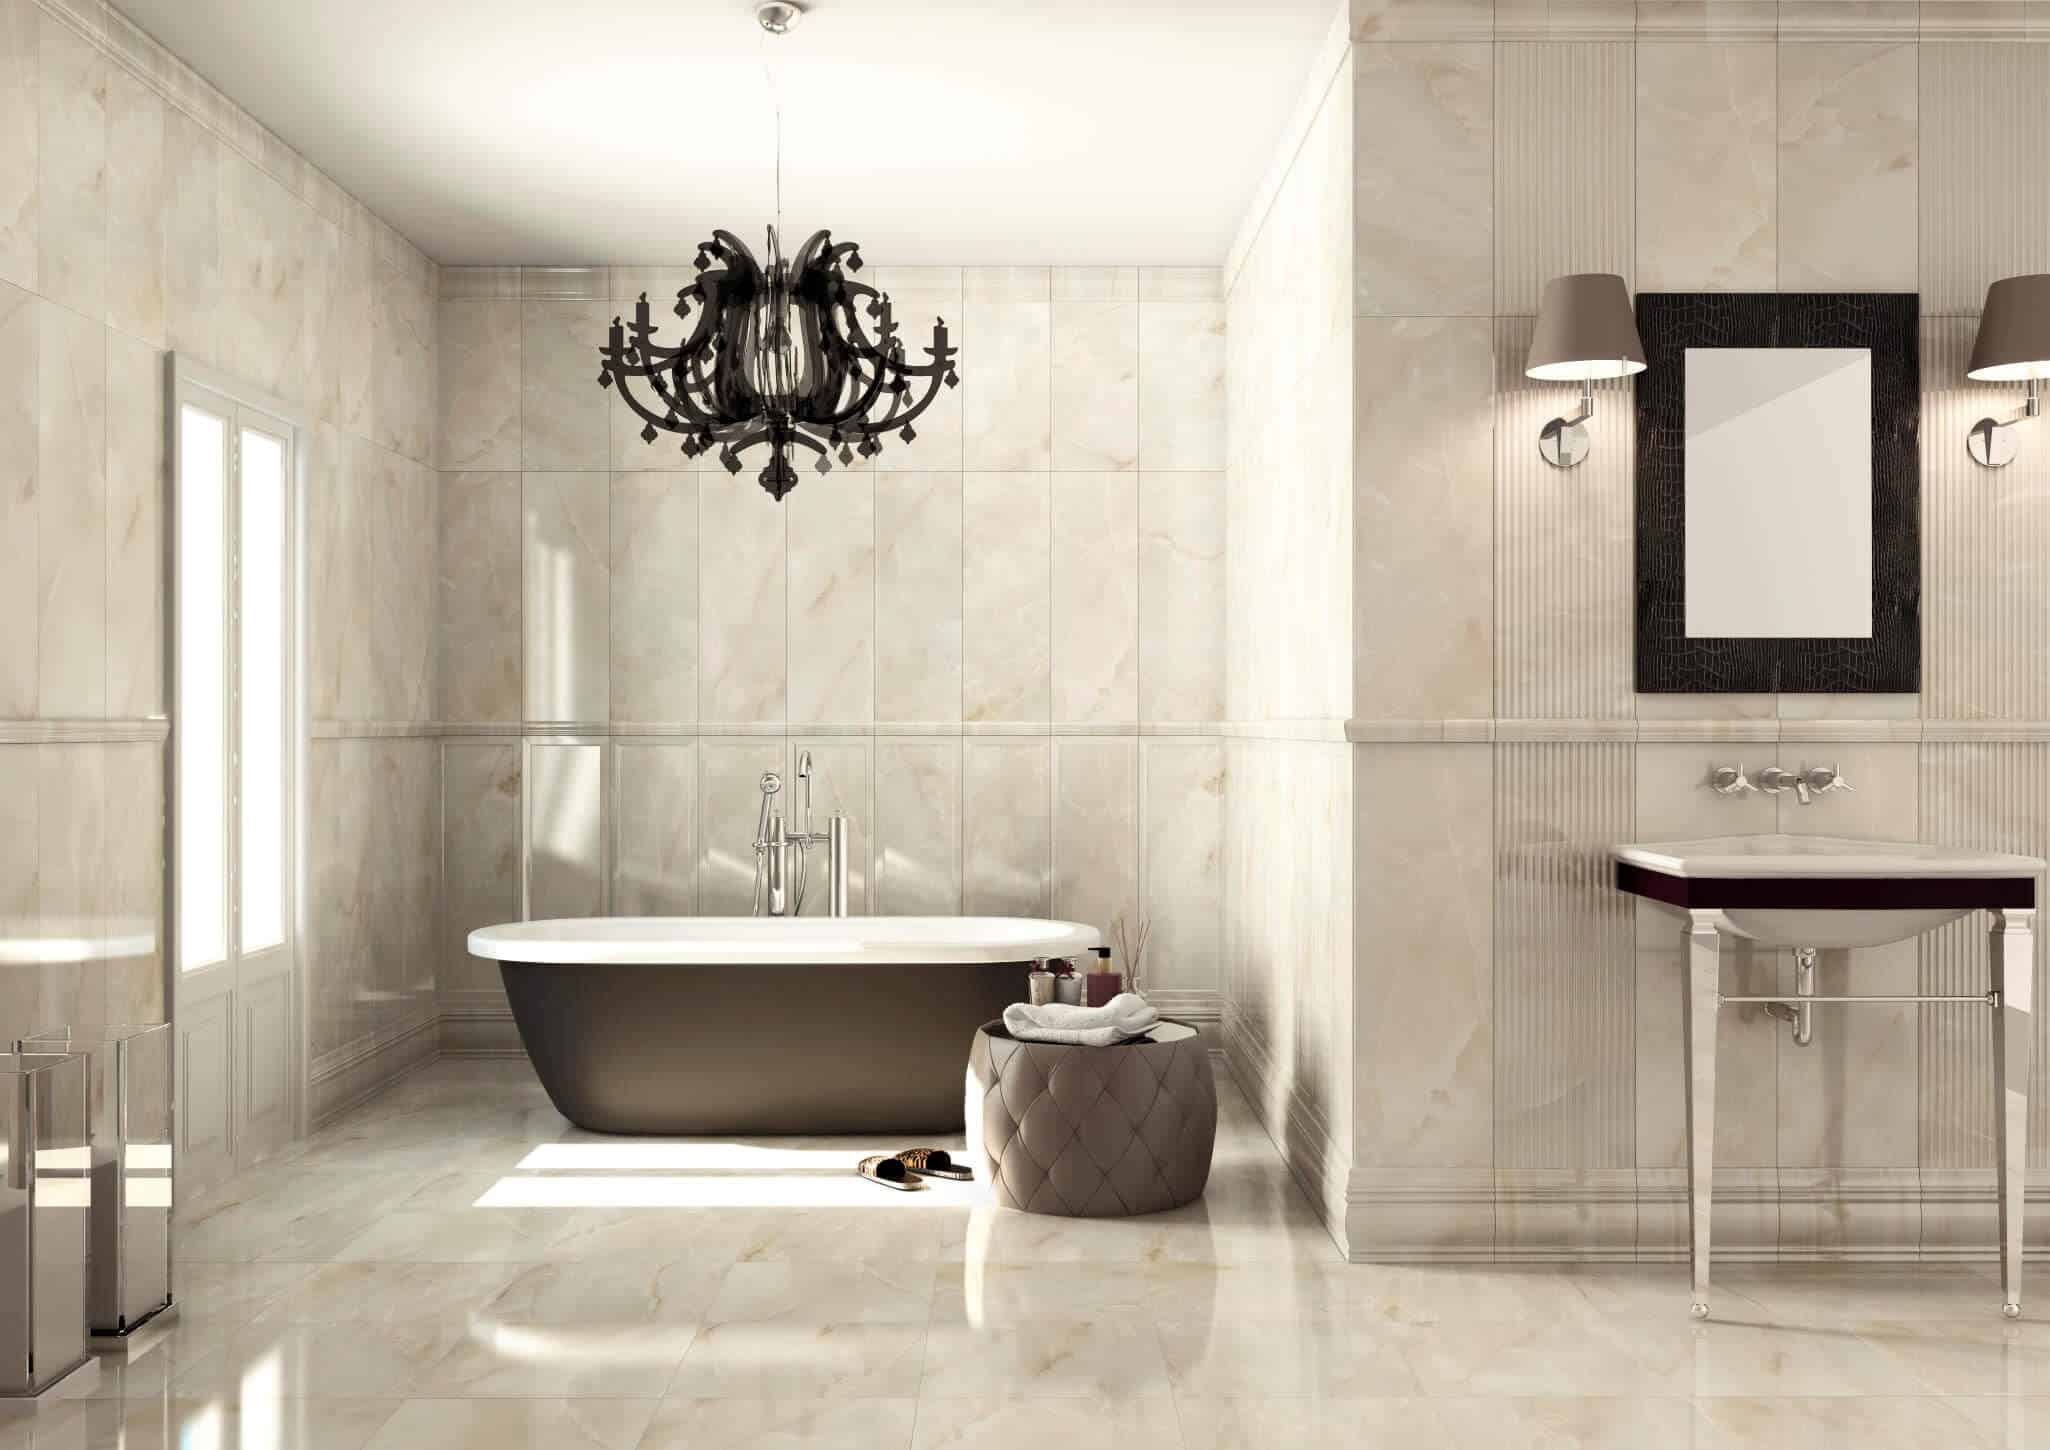 stunning bathroom interiors in Italian marble for counters and design flooring in beige colour with a bath tub